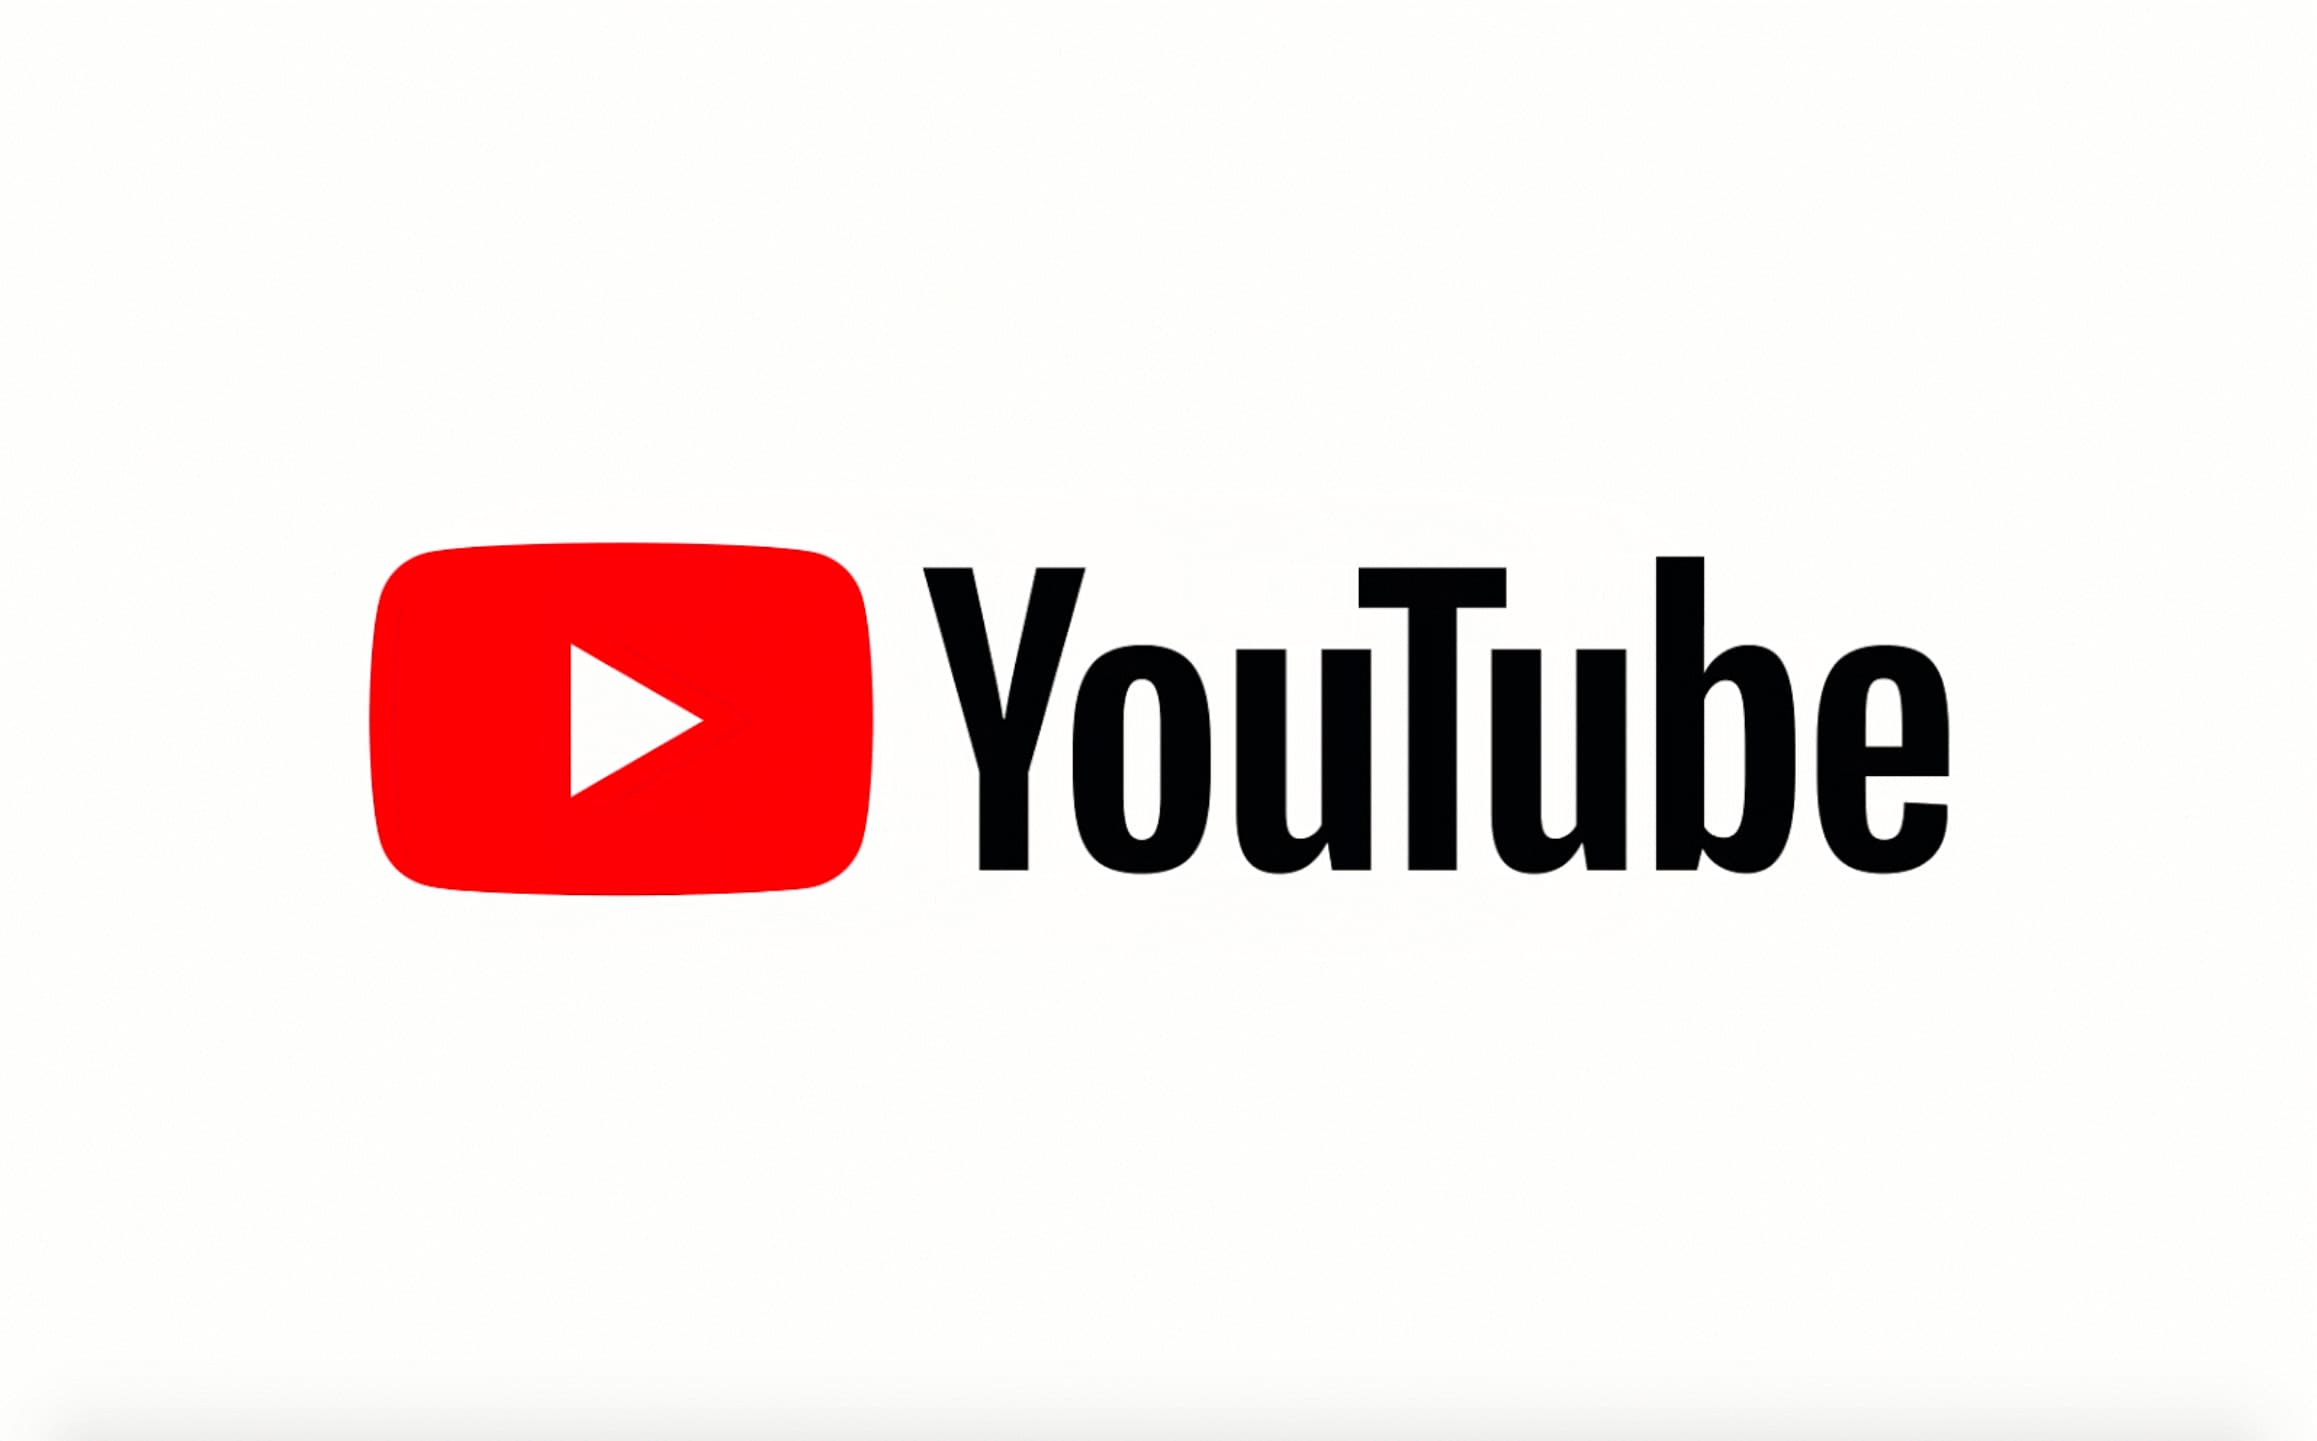 Download 1080p youtube videos for free - pletoday